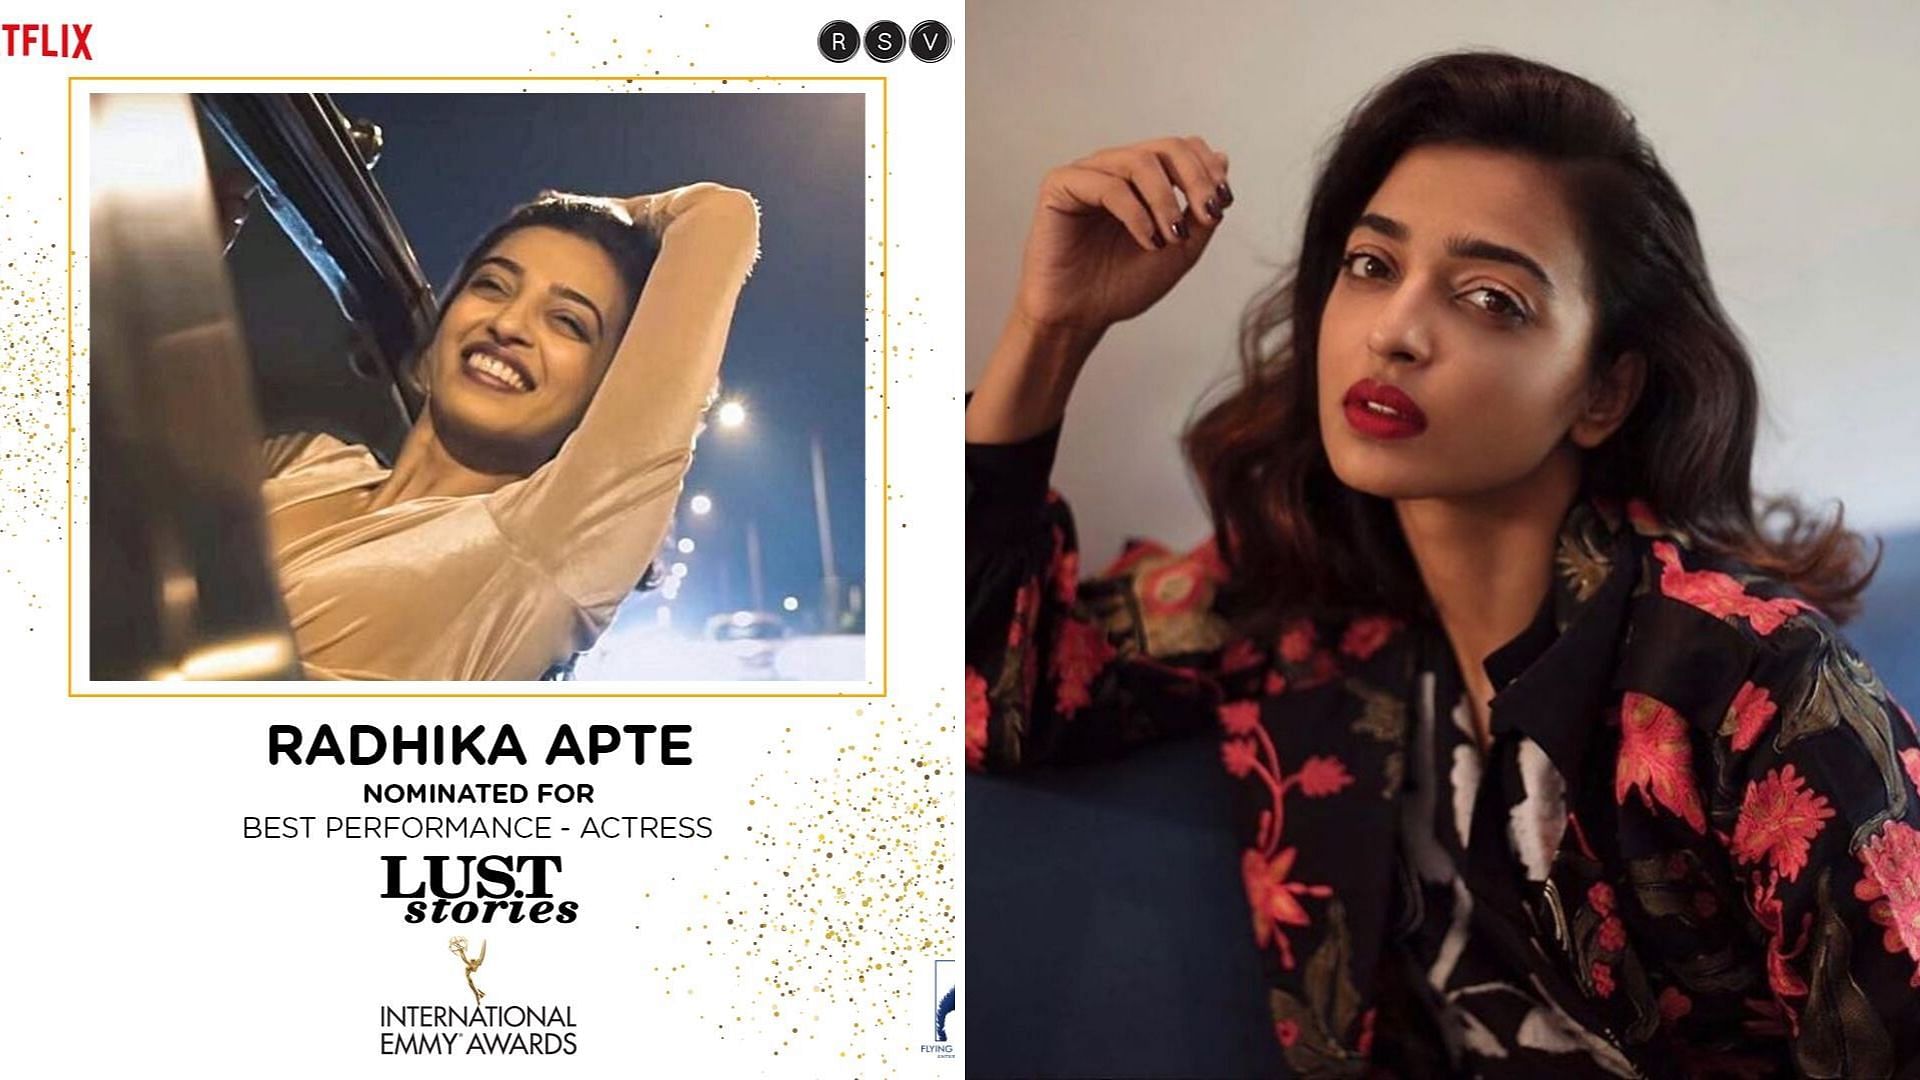 Radhika Apte nominated for an Emmy award.